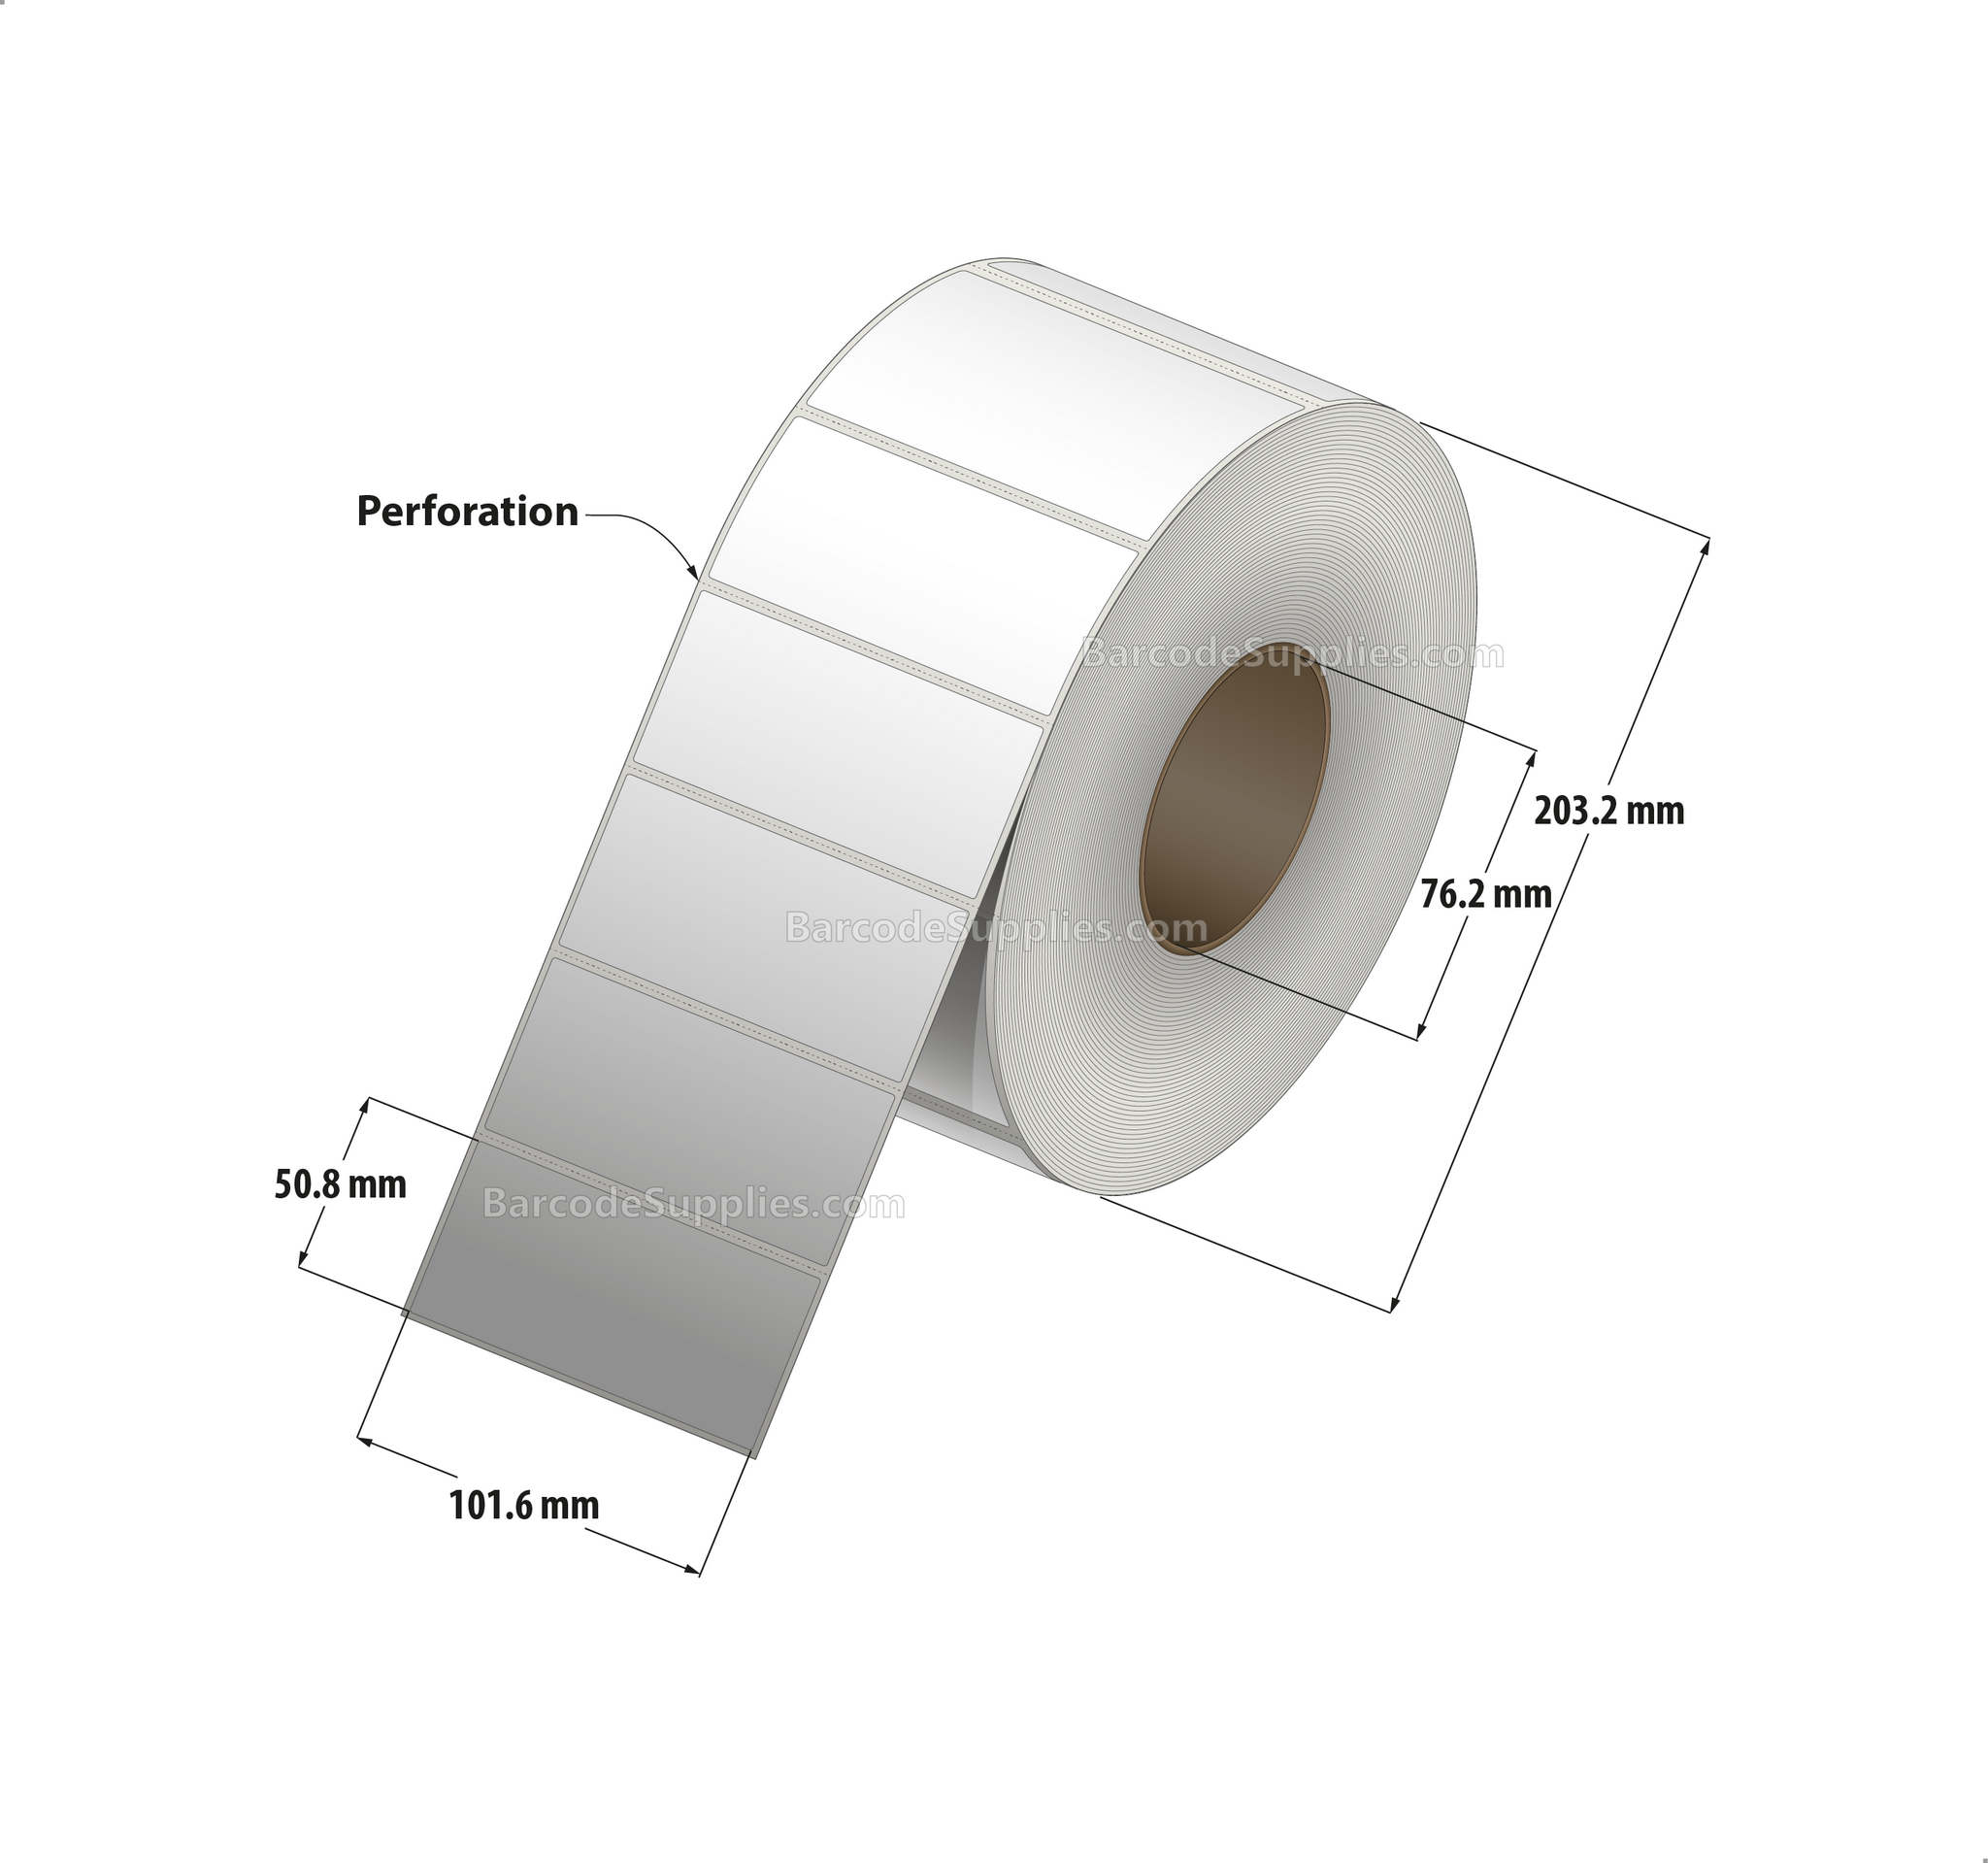 4 x 2 Thermal Transfer White Labels With Permanent Adhesive - Perforated - 2900 Labels Per Roll - Carton Of 4 Rolls - 11600 Labels Total - MPN: RT-4-2-2900-3